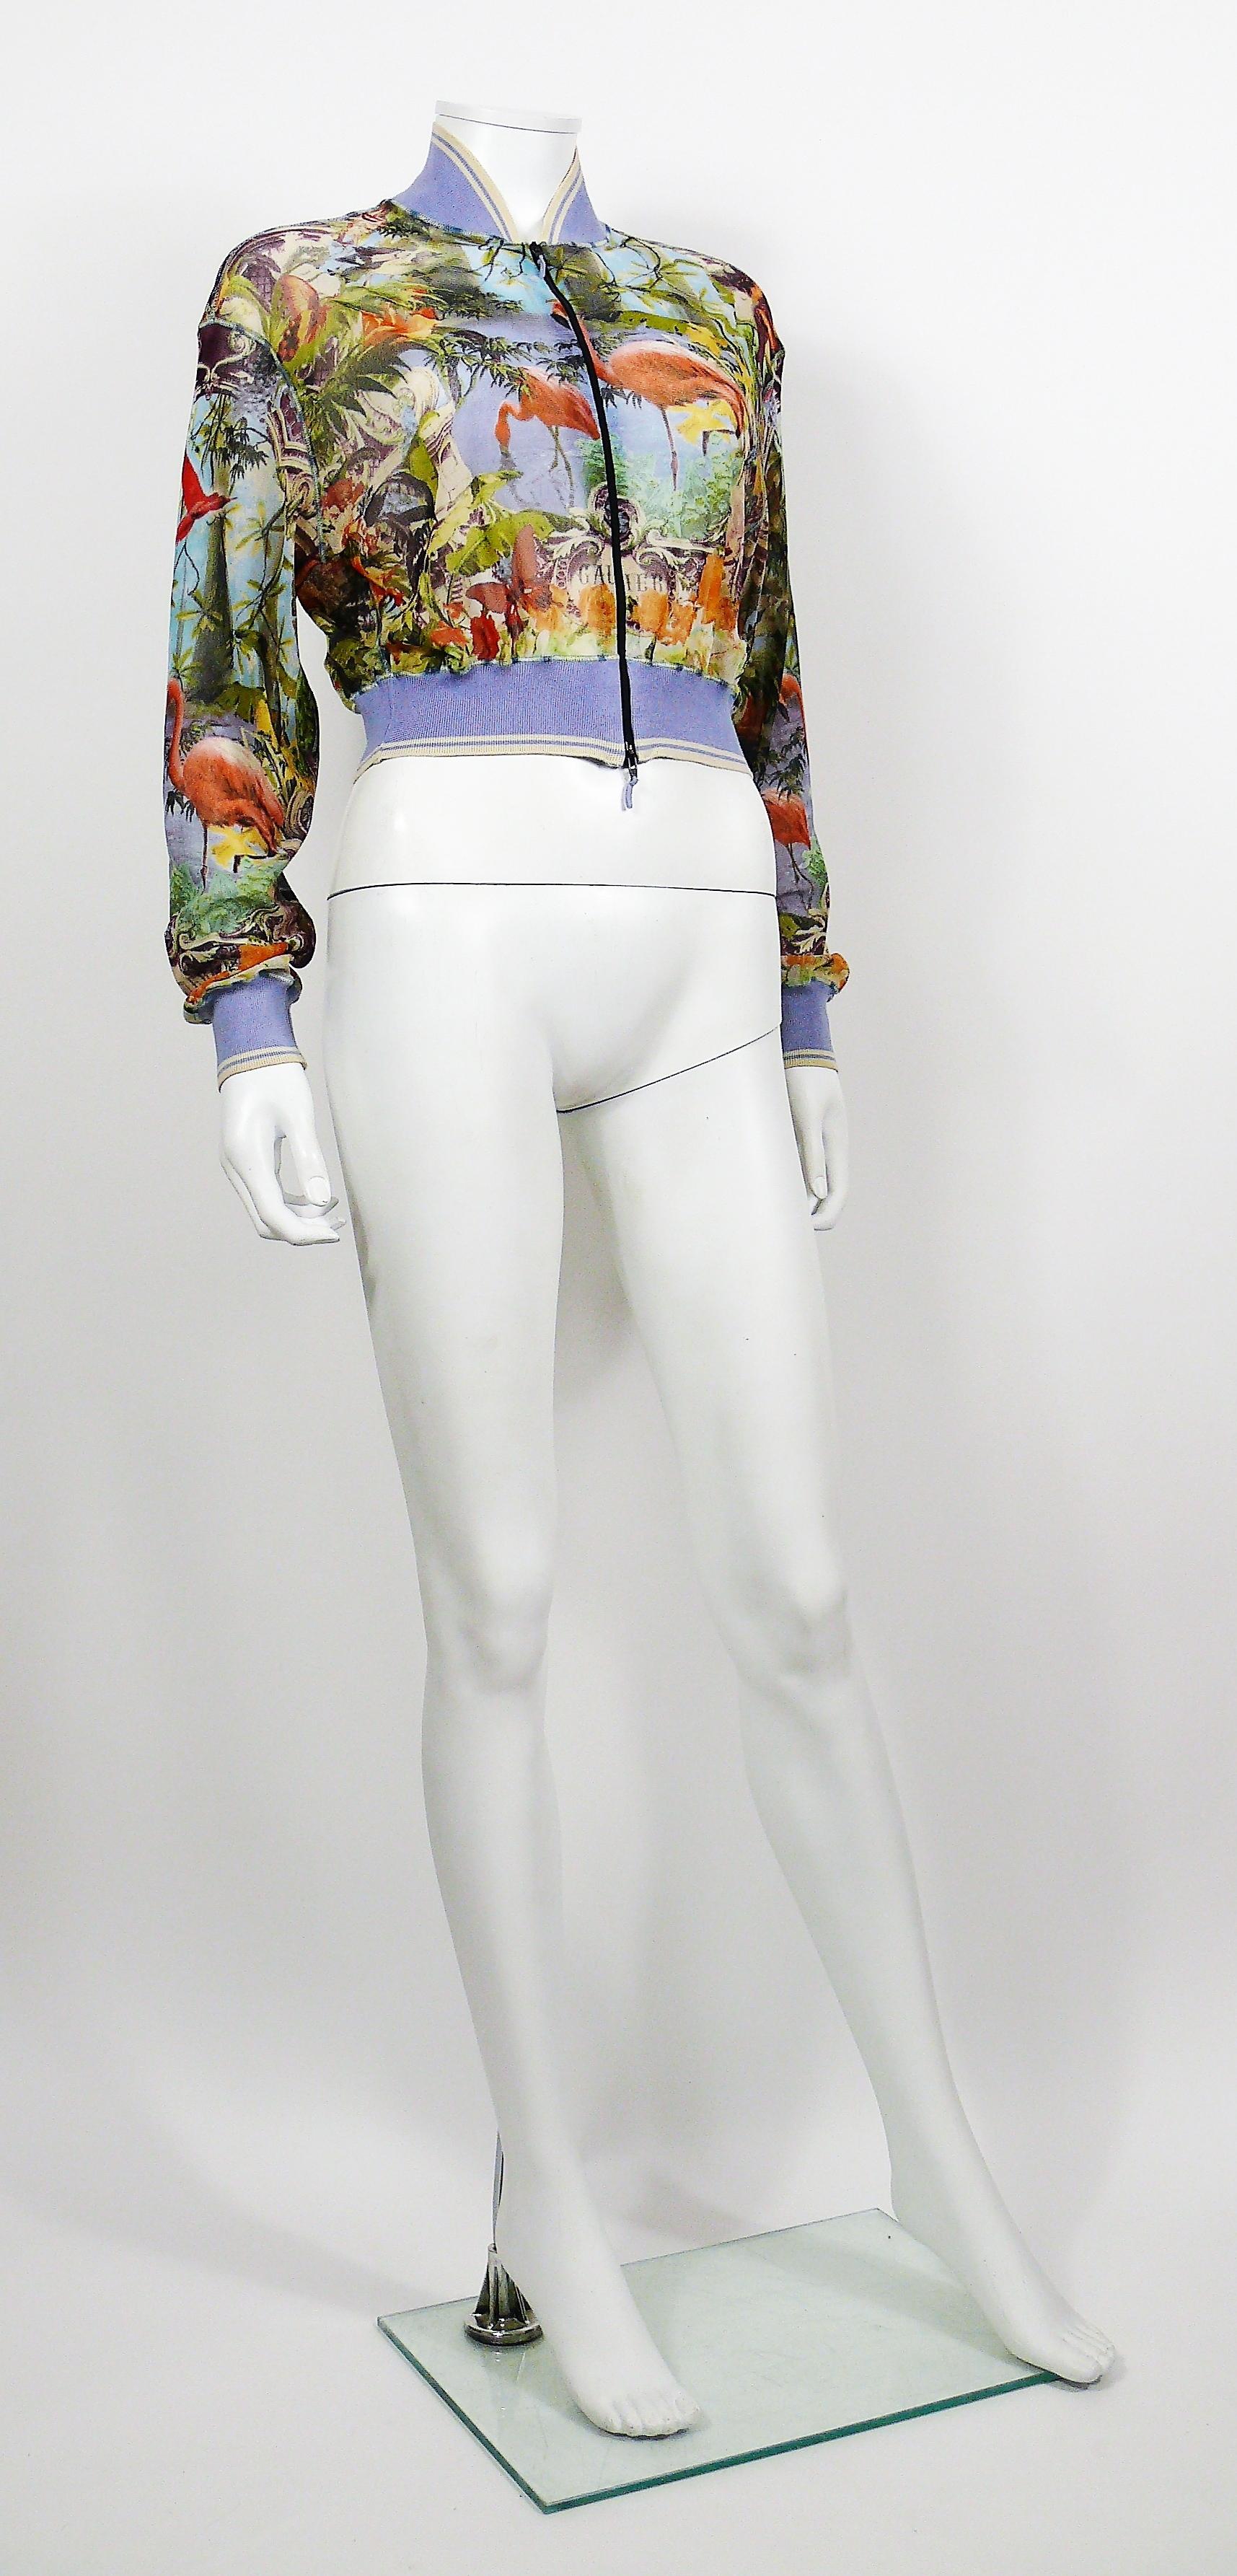 JEAN PAUL GAULTIER vintage tropical print sheer FUZZI bomber jacket.

This jacket features :
- Multicolored tropical print with flamingos, butterflies, birds and architectural elements.
- Front zipper closure.
- Cropped length.
- Knitted collar and